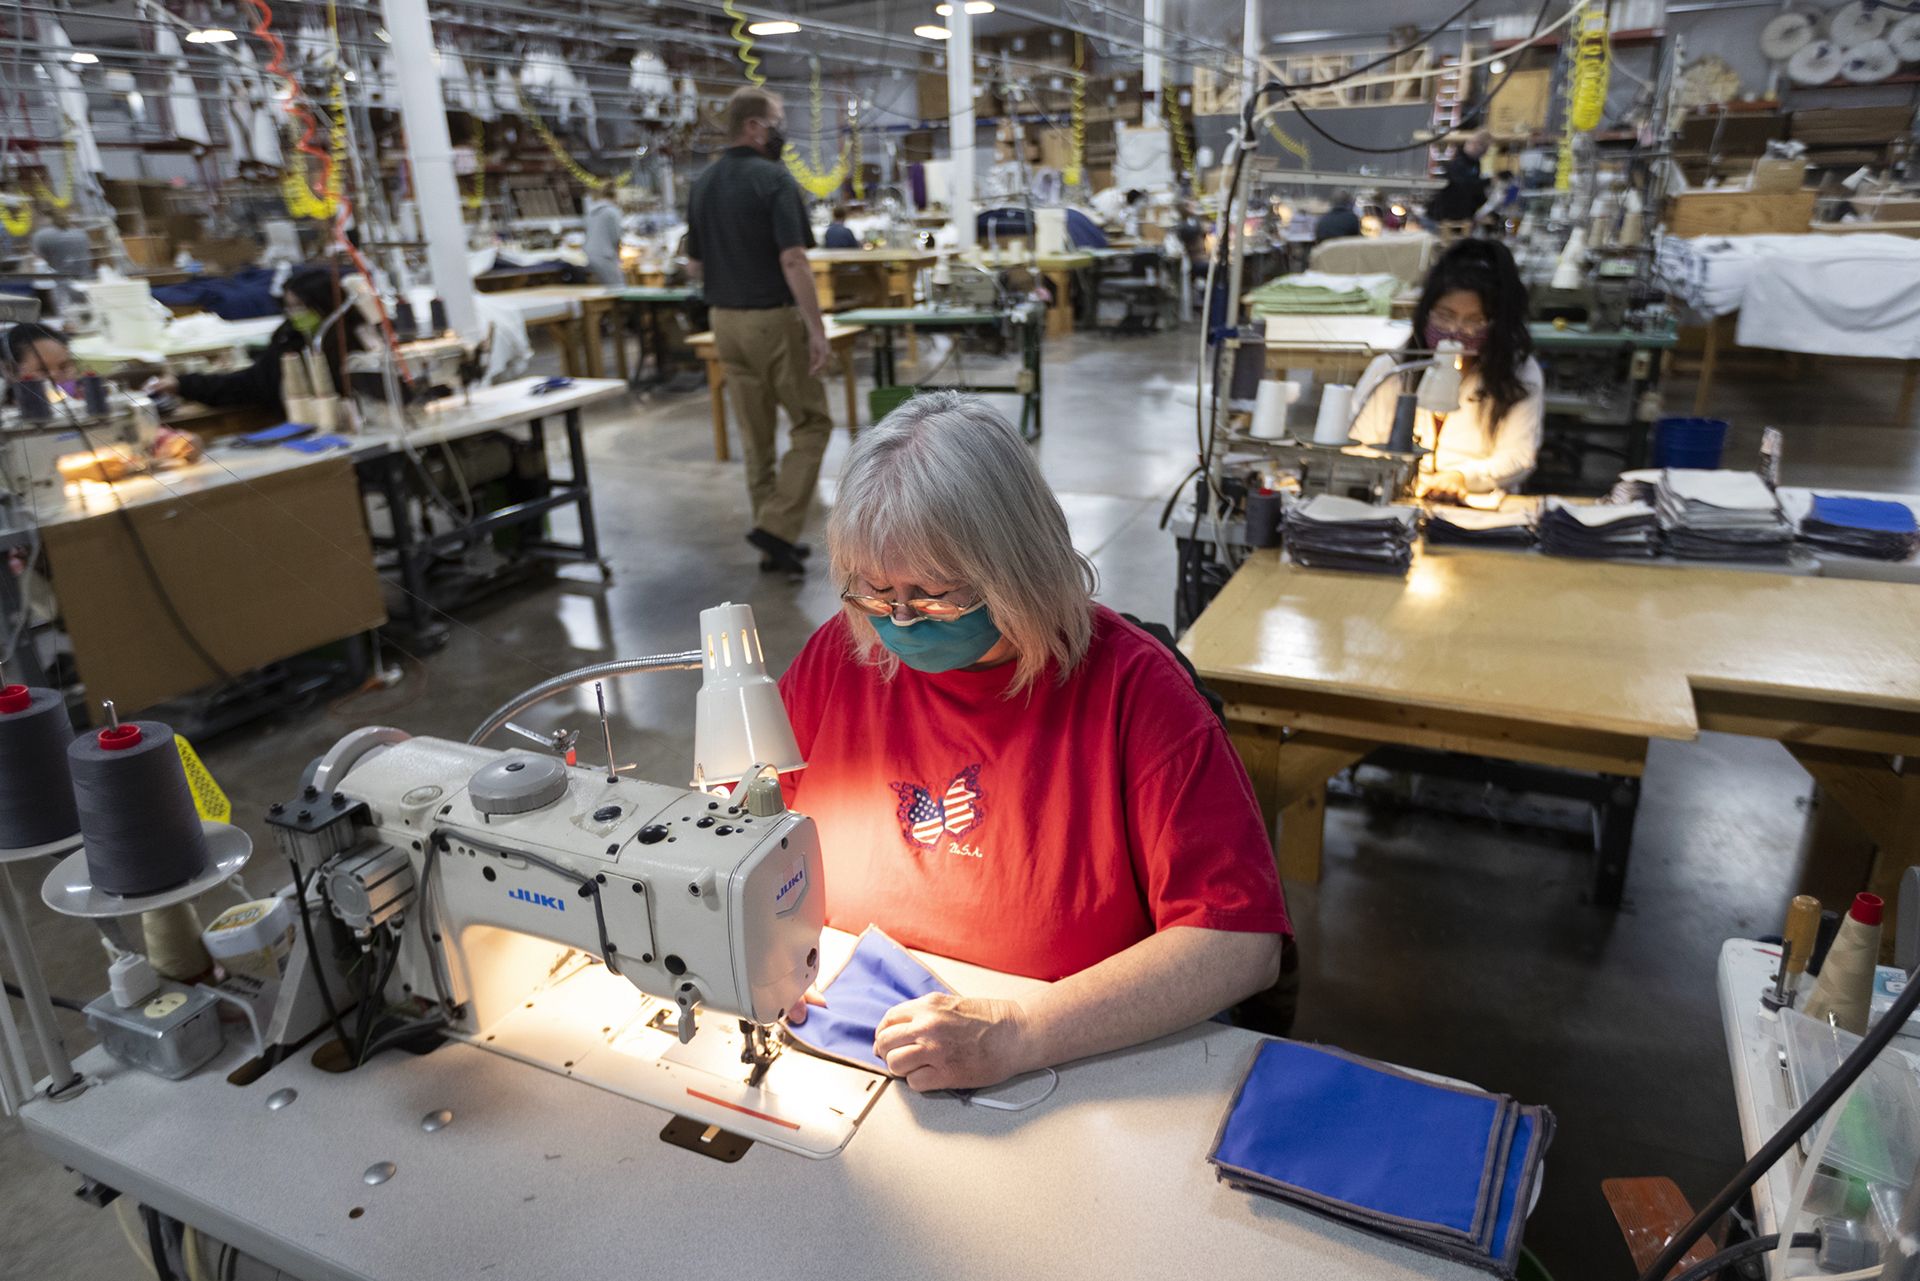 Workers sew non-medical masks on April 23, 2020 at Decorator Industries in Abbotsford, Wis. The company, which normally produces room furnishings for the hotel industry, quickly pivoted to making face masks. Image by Mark Hoffman / Milwaukee Journal Sentinel. United States, 2020.